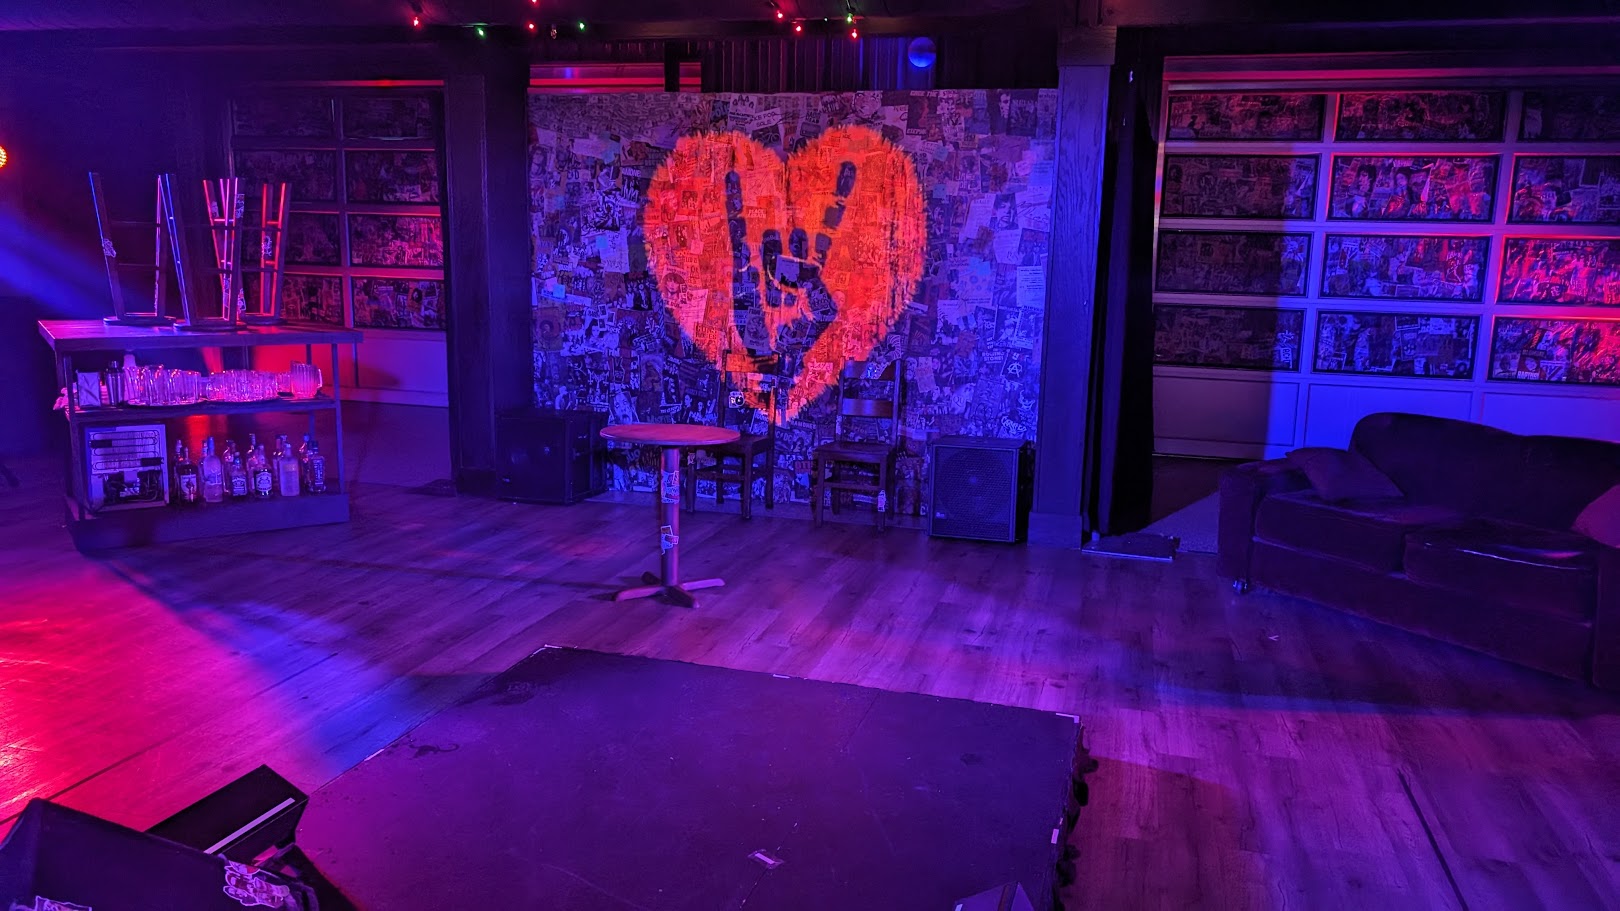 An indoor setting bathed in vibrant purple and blue stage lighting. At the center is a wall filled with a collage of posters, upon which a heart symbol with a peace sign is prominently featured. To the left, there's a bar with glasses and bottles, as well as a table with laptops. To the right, a comfortable-looking couch sits in front of a wall where framed pictures or posters are displayed. The hardwood floor reflects the colorful lighting, creating a warm ambiance. This scene appears to be from a performance space or a venue set up for an event.